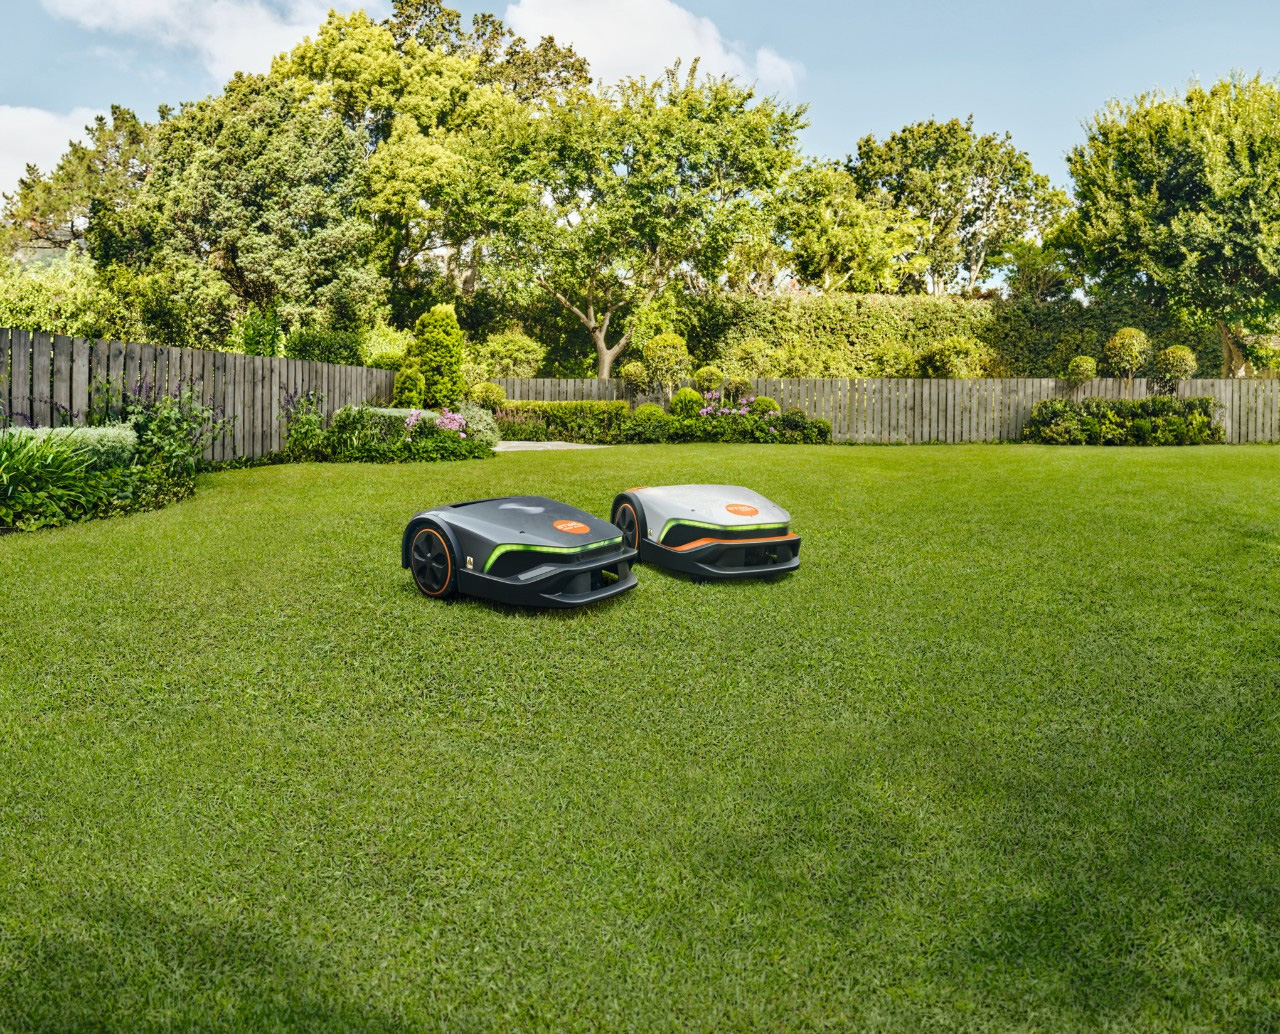 THE NEXT GENERATION OF IMOW® & IMOW® EVO ROBOTIC LAWN MOWERS